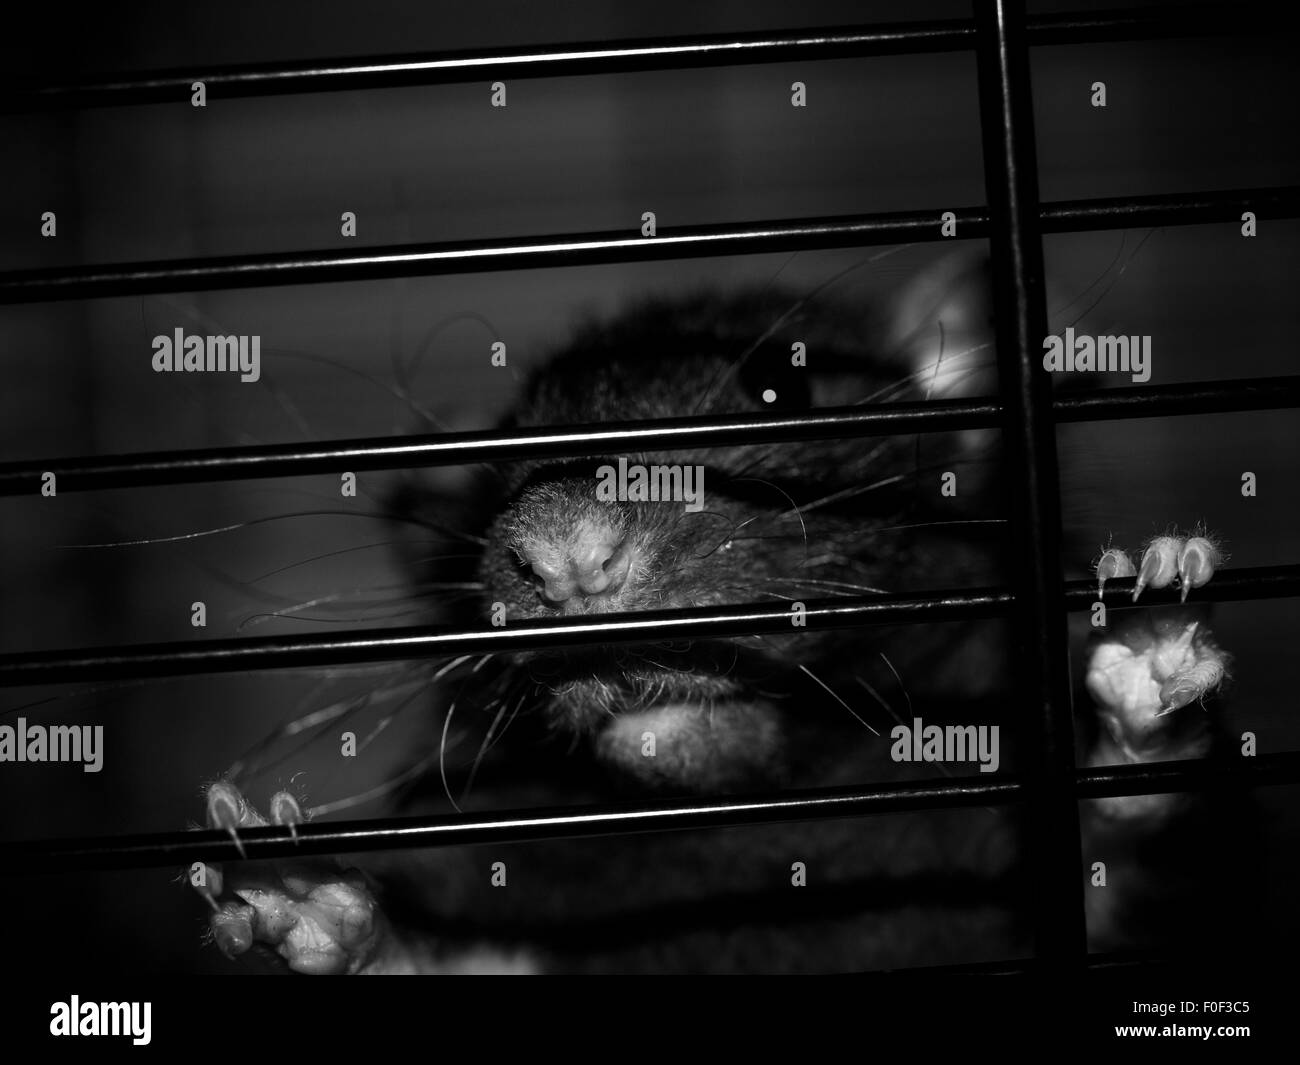 Pet Dumbo rat holding onto bars of cage looking out (Black and White) Stock Photo